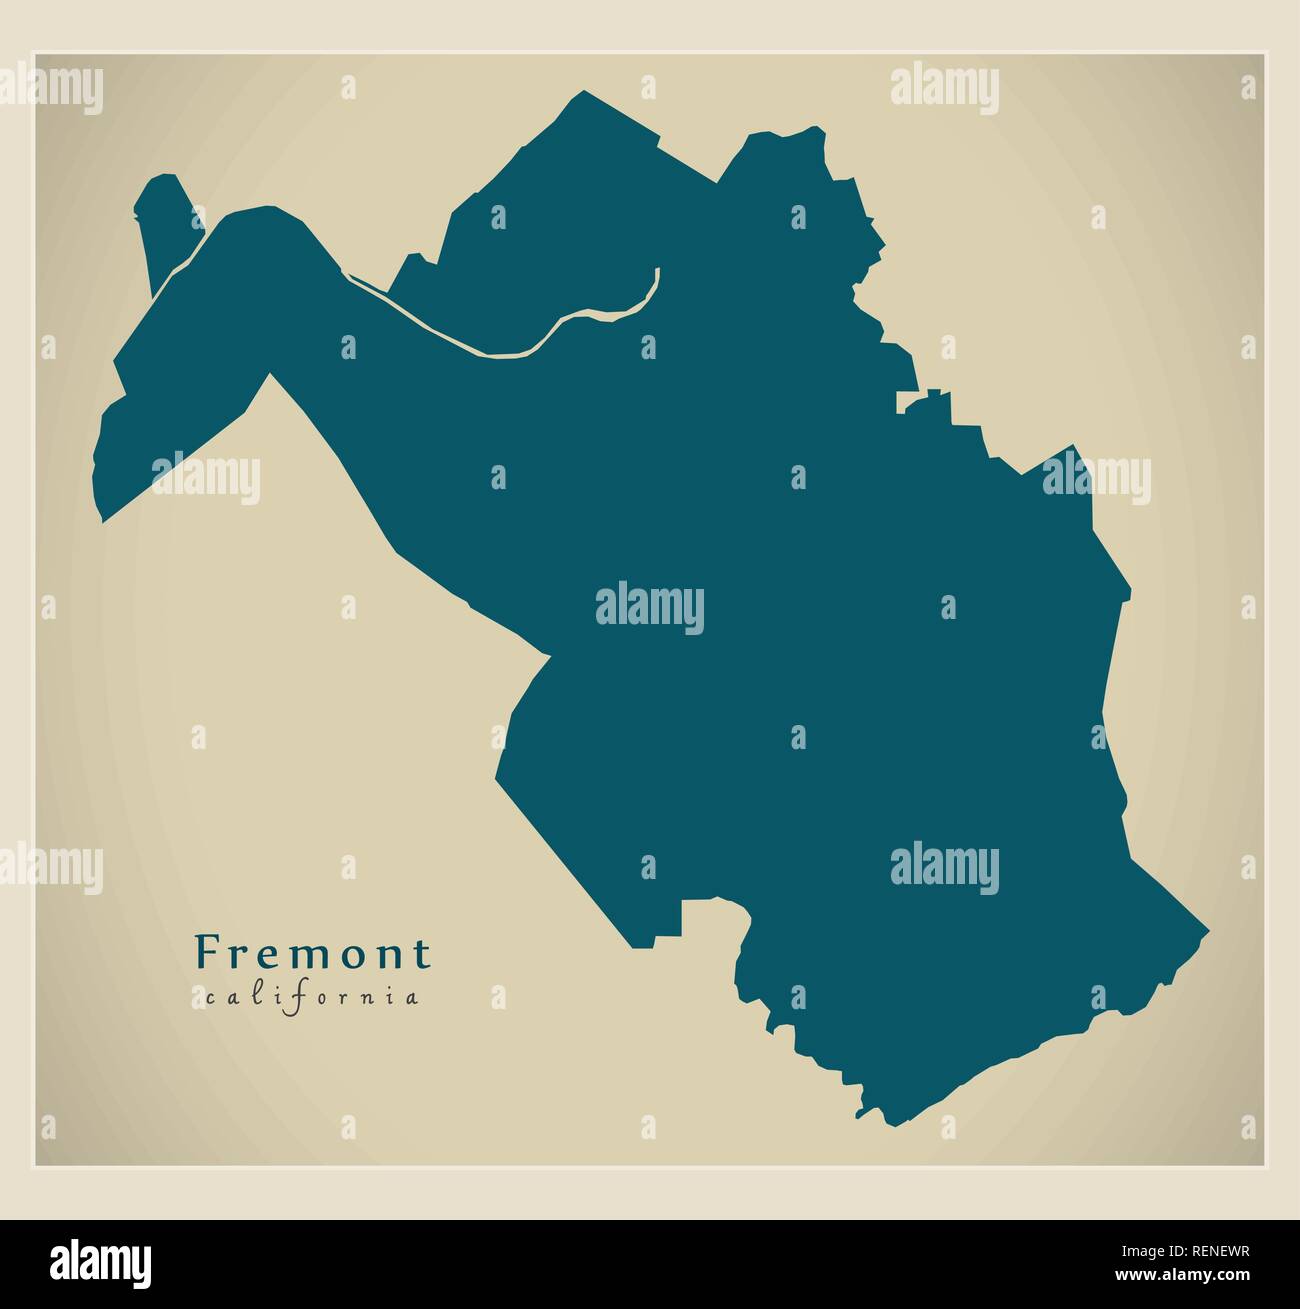 Modern City Map - Fremont California city of the USA Stock Vector